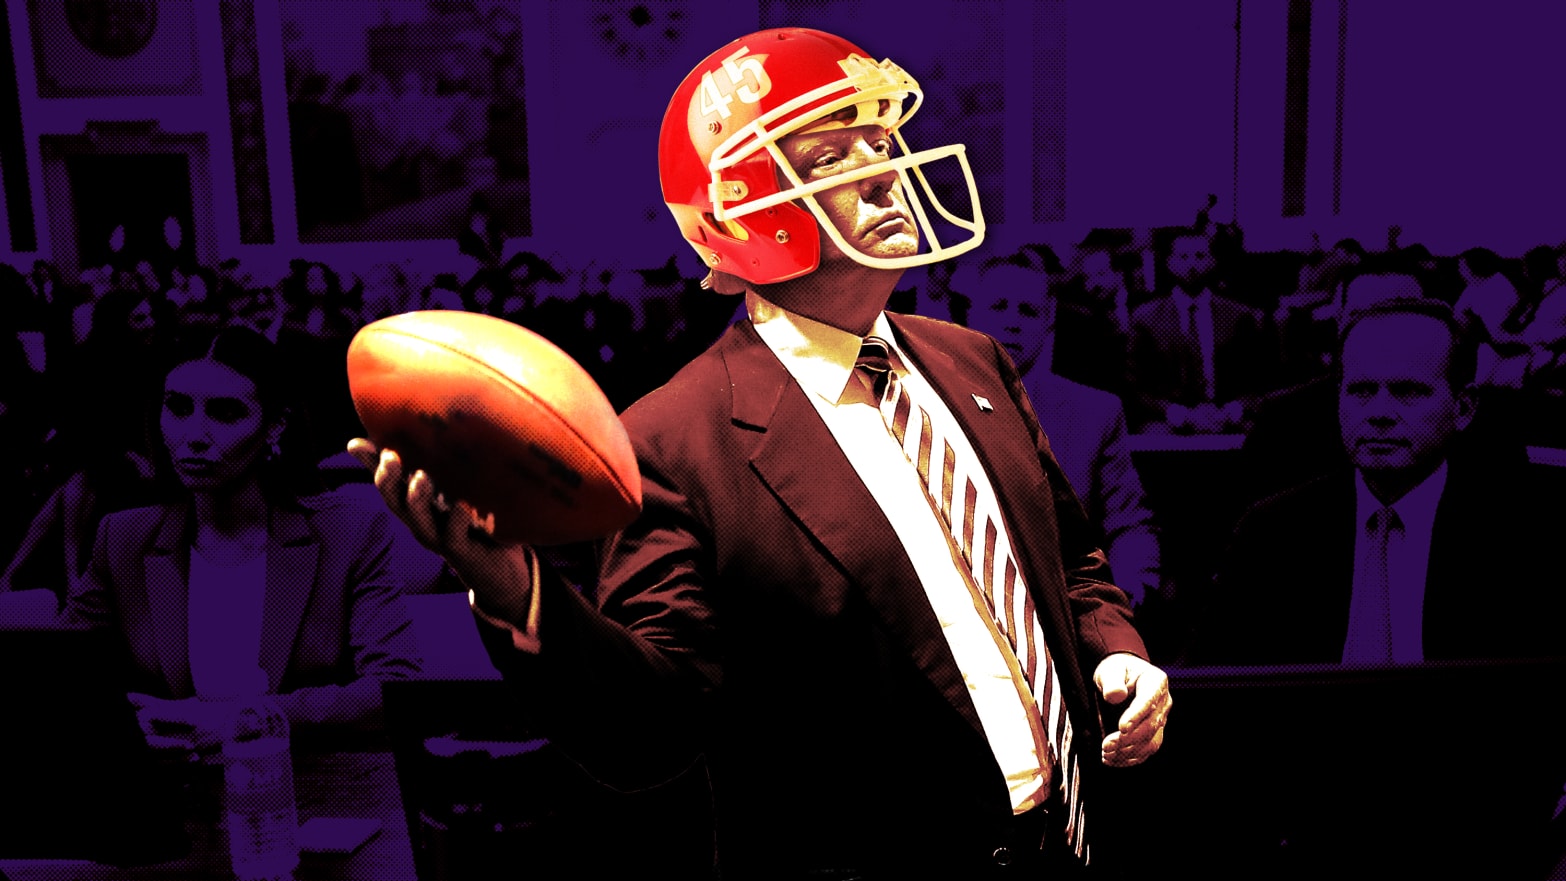 A photo illustration of former President Donald Trump throwing a football.